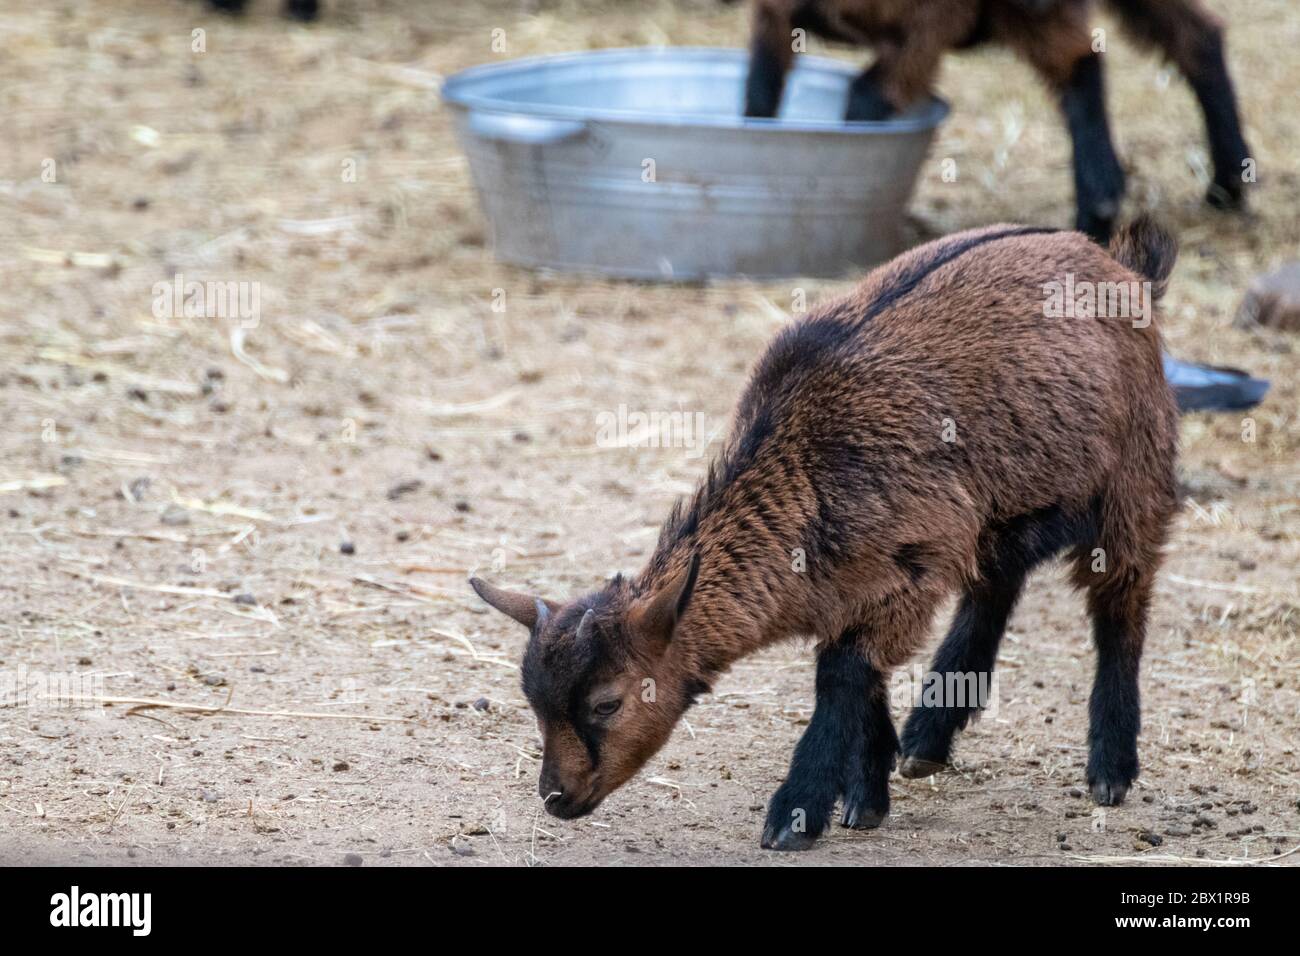 A cute playful baby brown goat standing on straw bedding in an animal farm yard Stock Photo